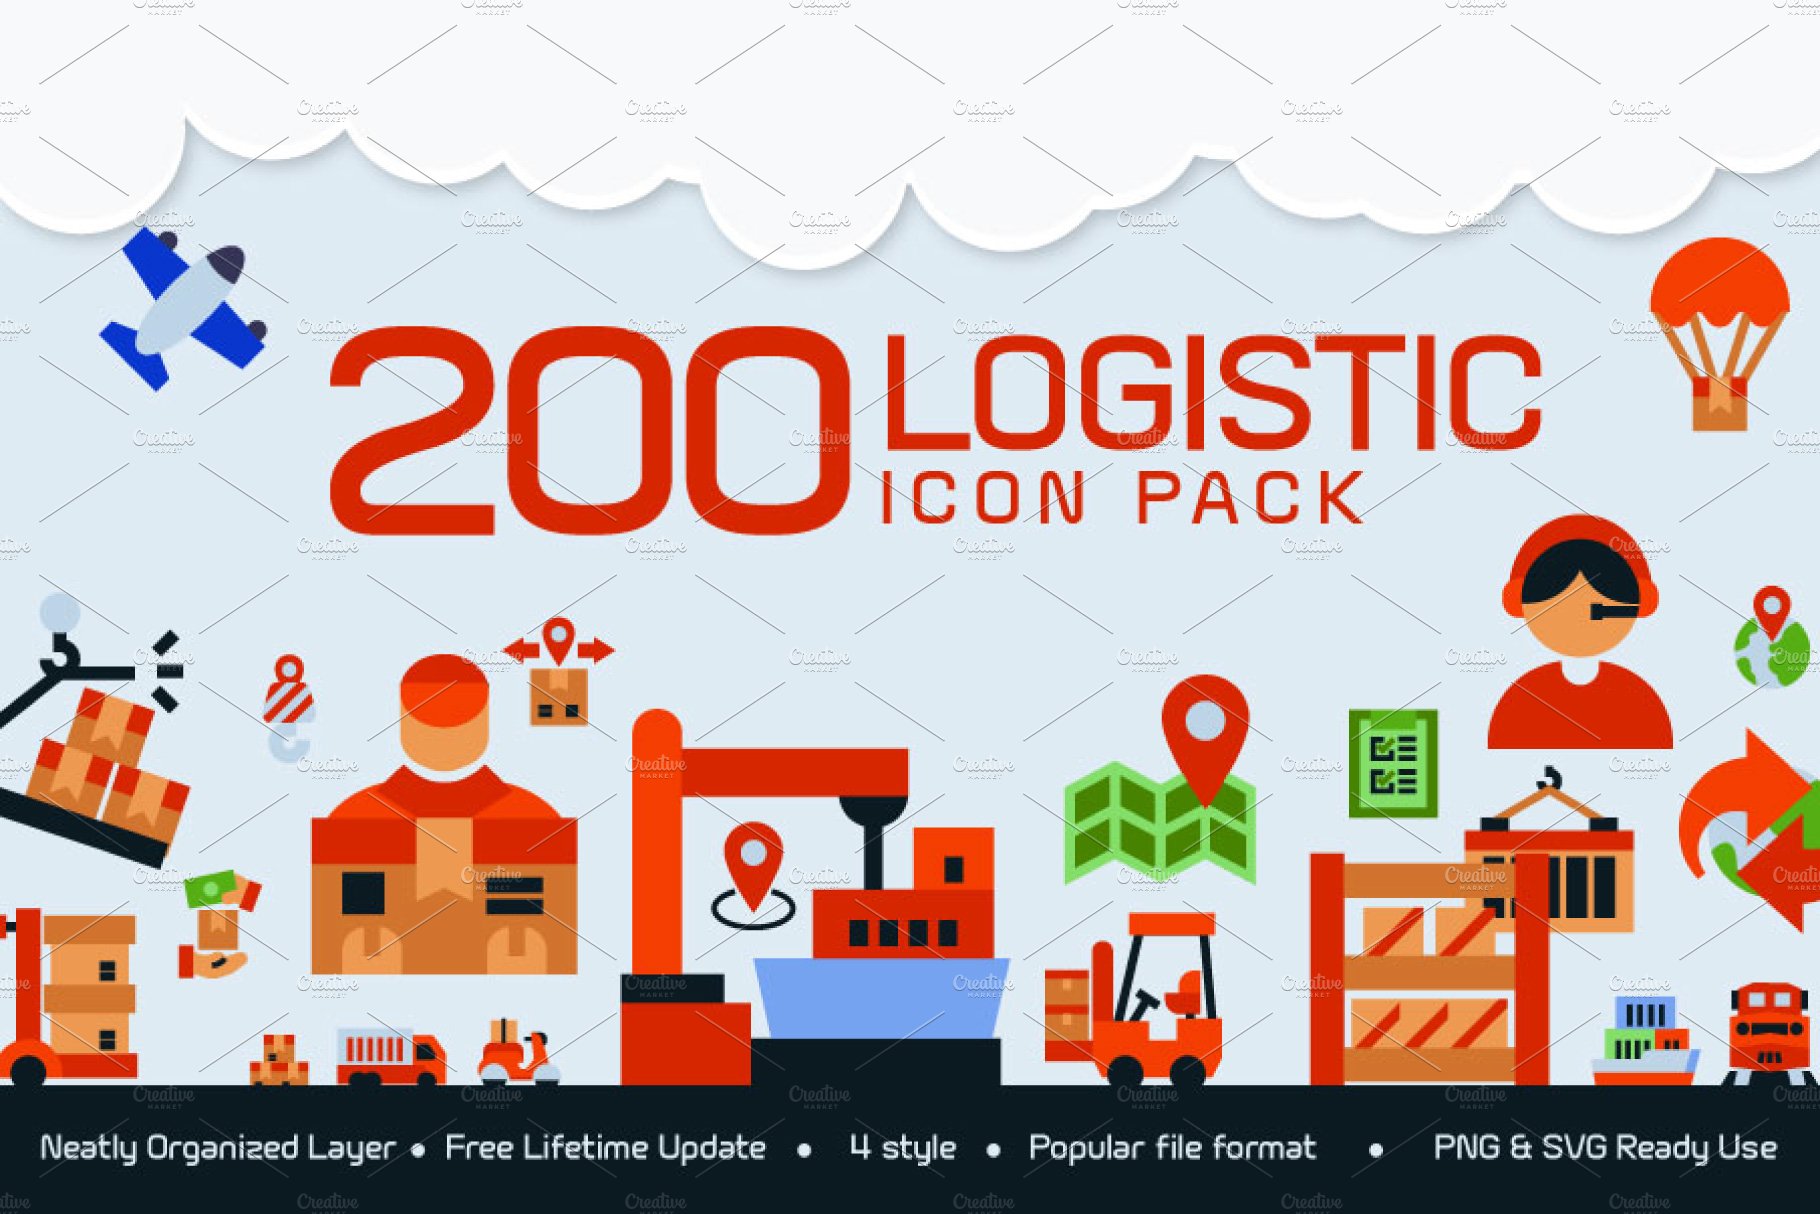 200 Logistic Icon Pack cover image.